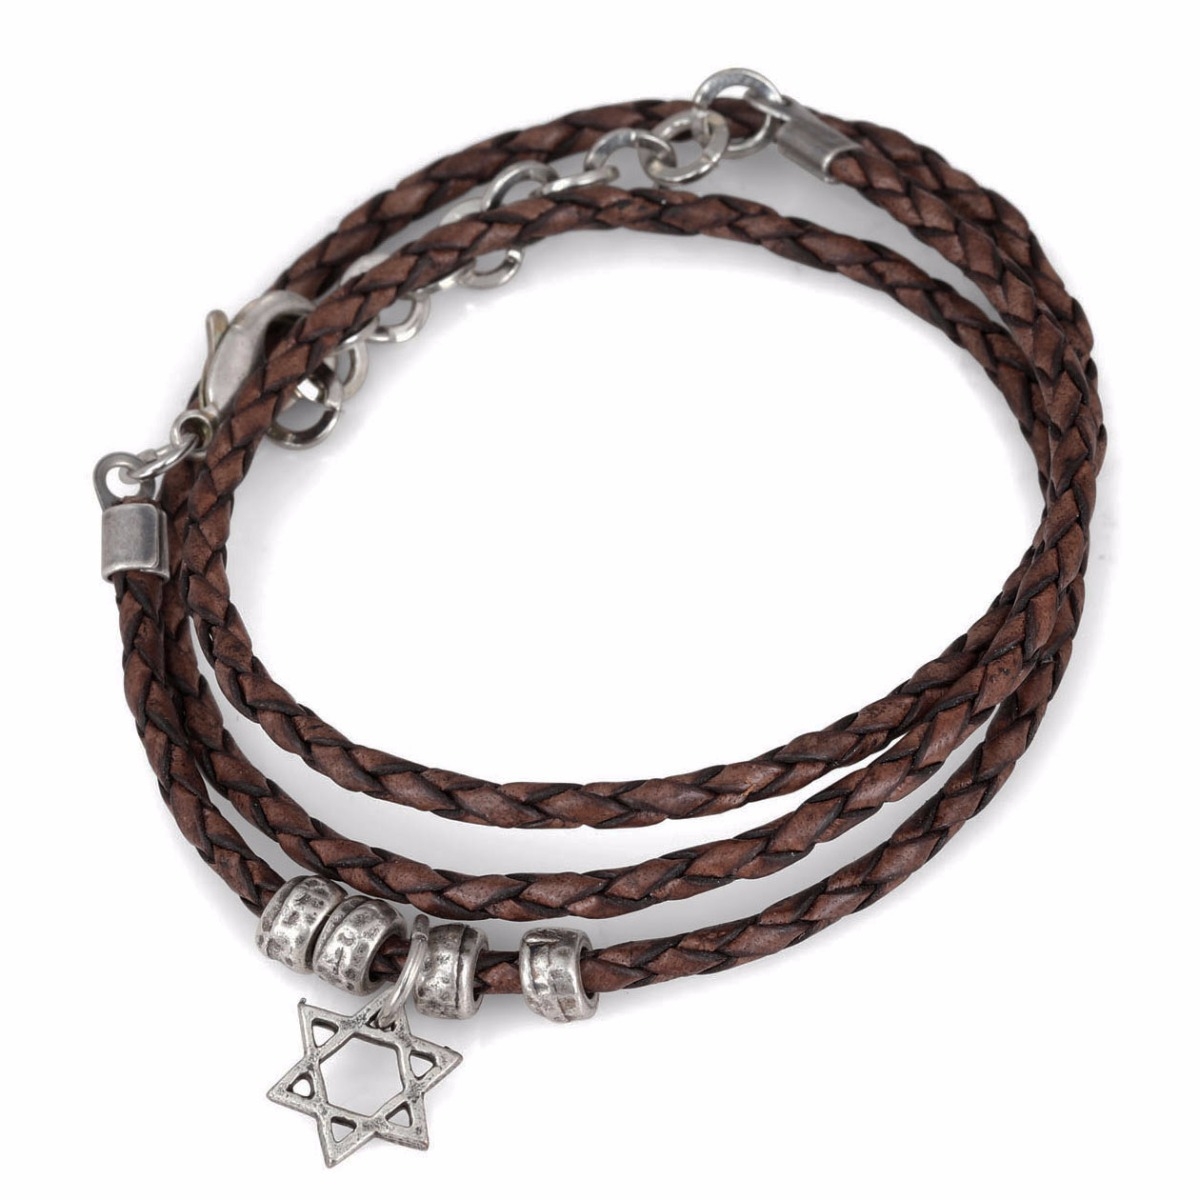 Galis Jewelry Tripple Wrap Brown Leather Men’s Bracelet with Silver Plated Star of David - 1